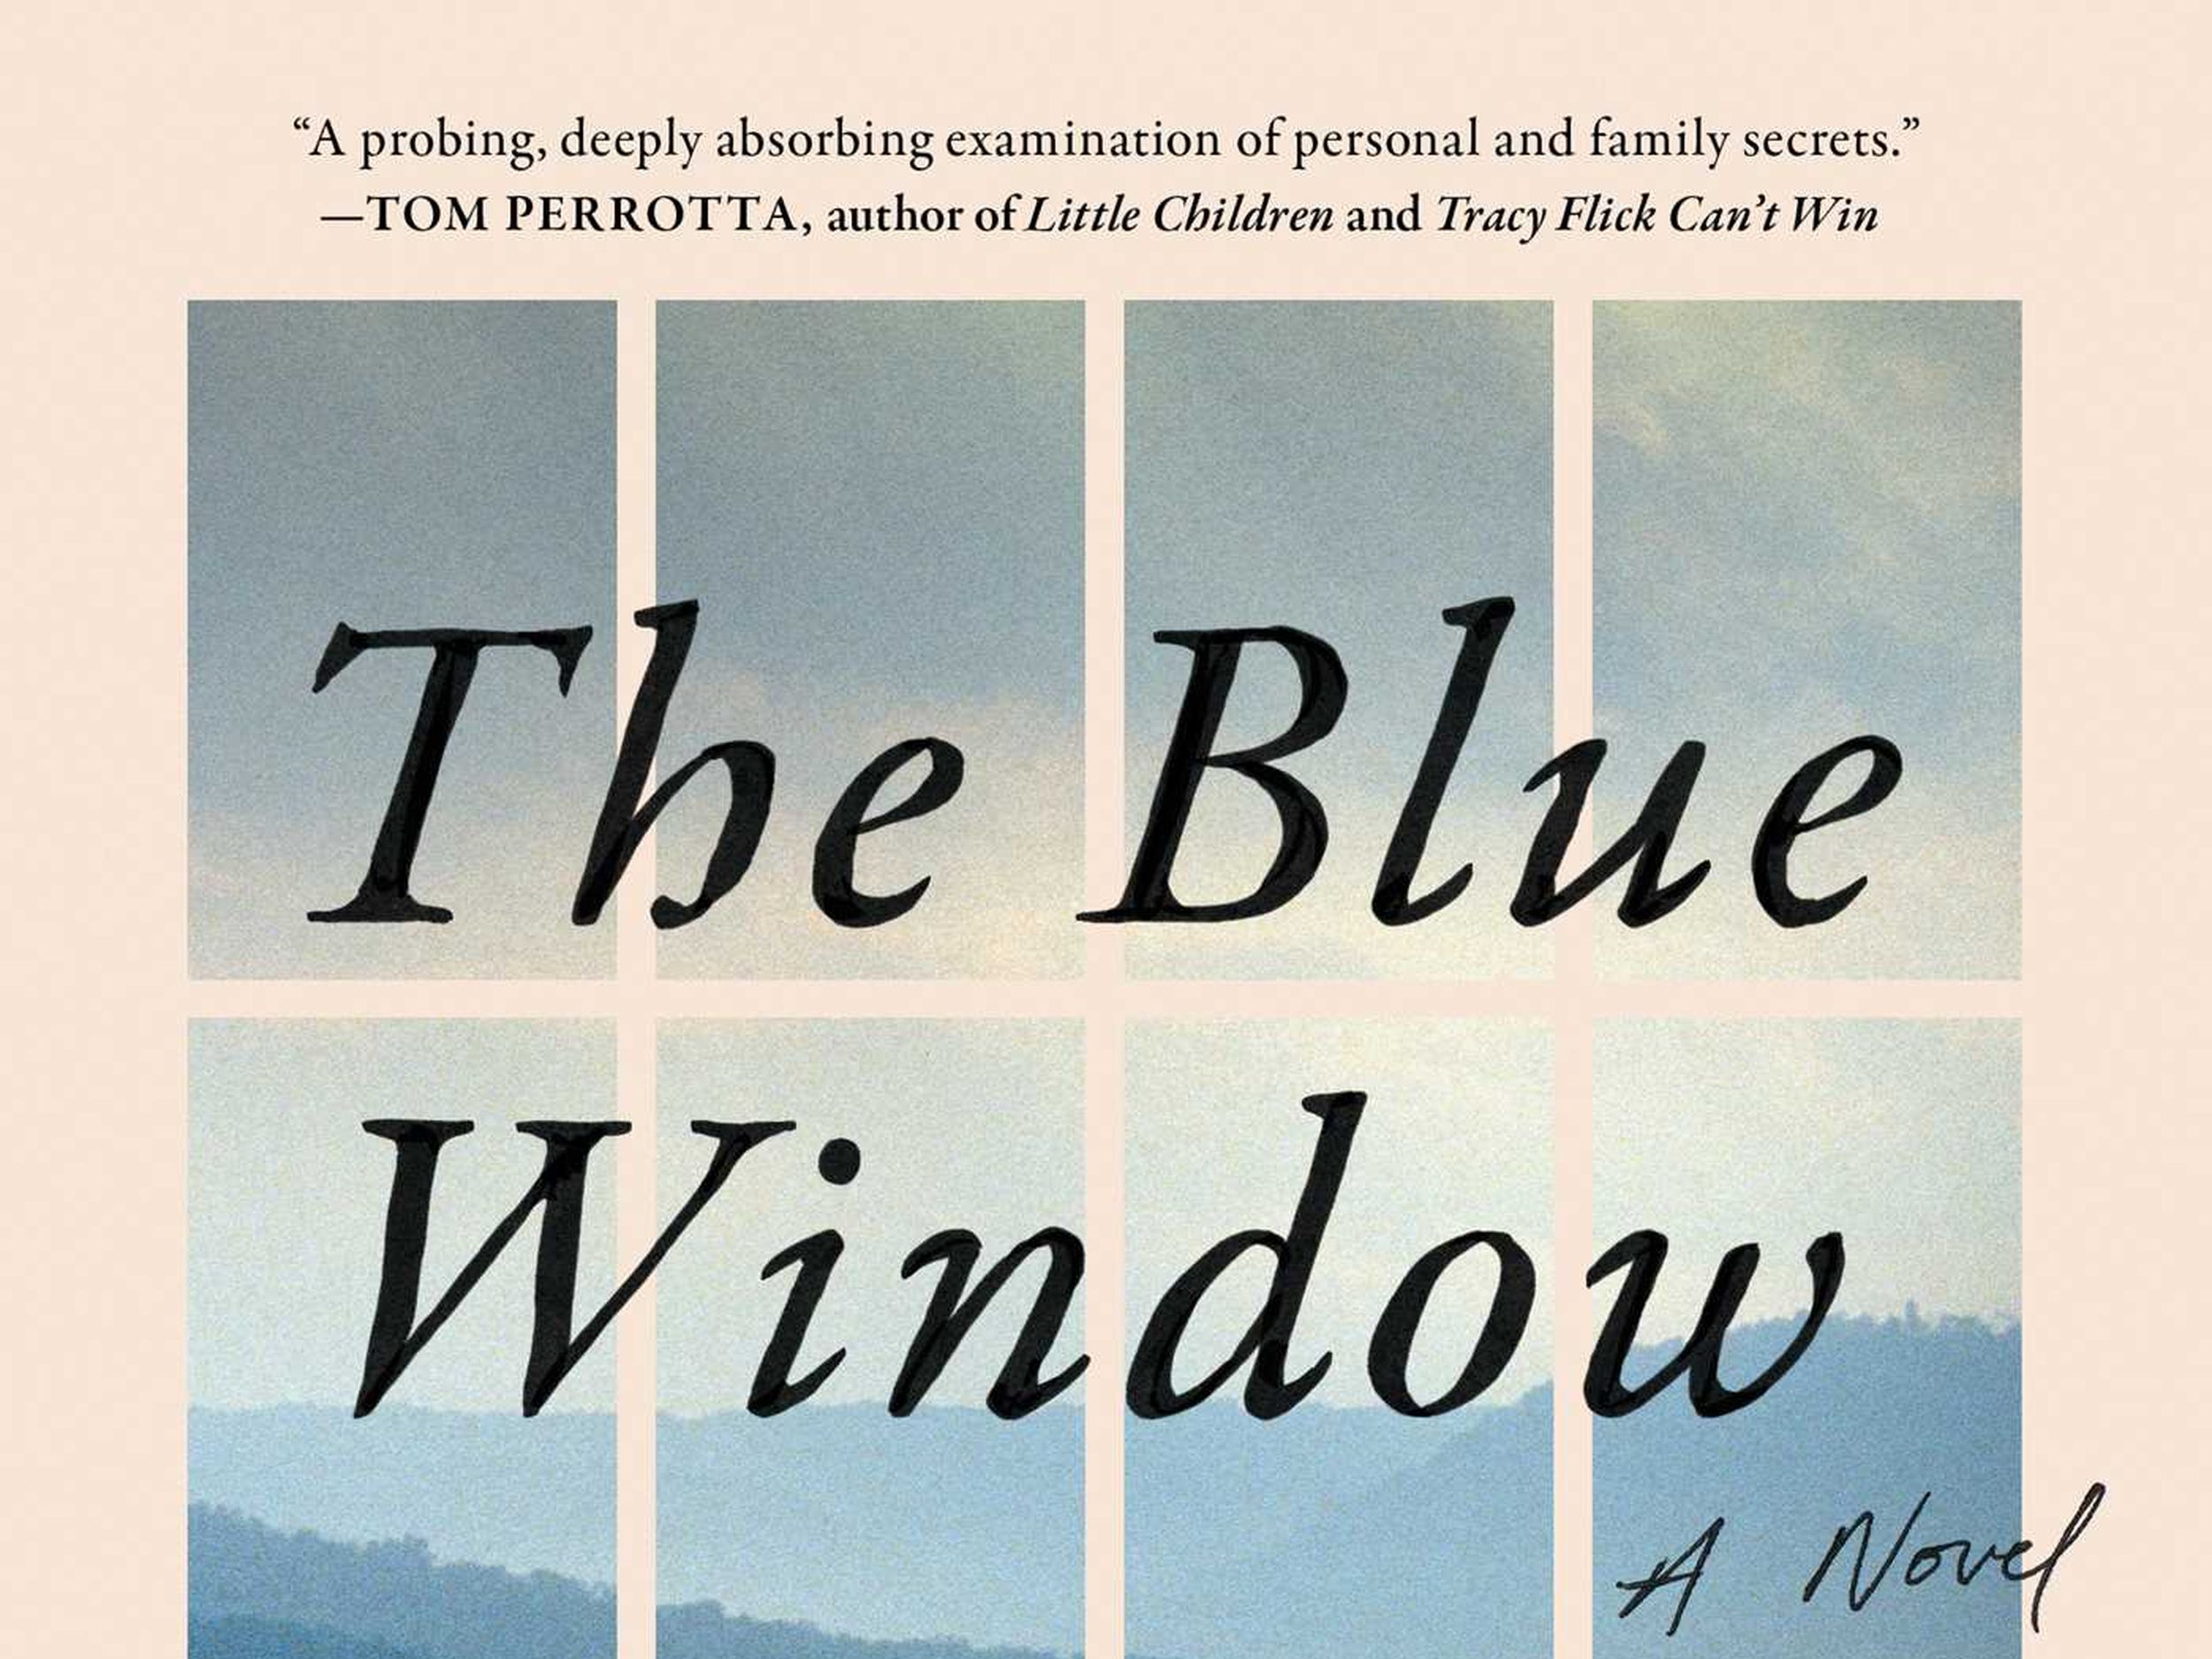 REVIEW: In 'The Blue Window,' three generations try to make sense of the  past